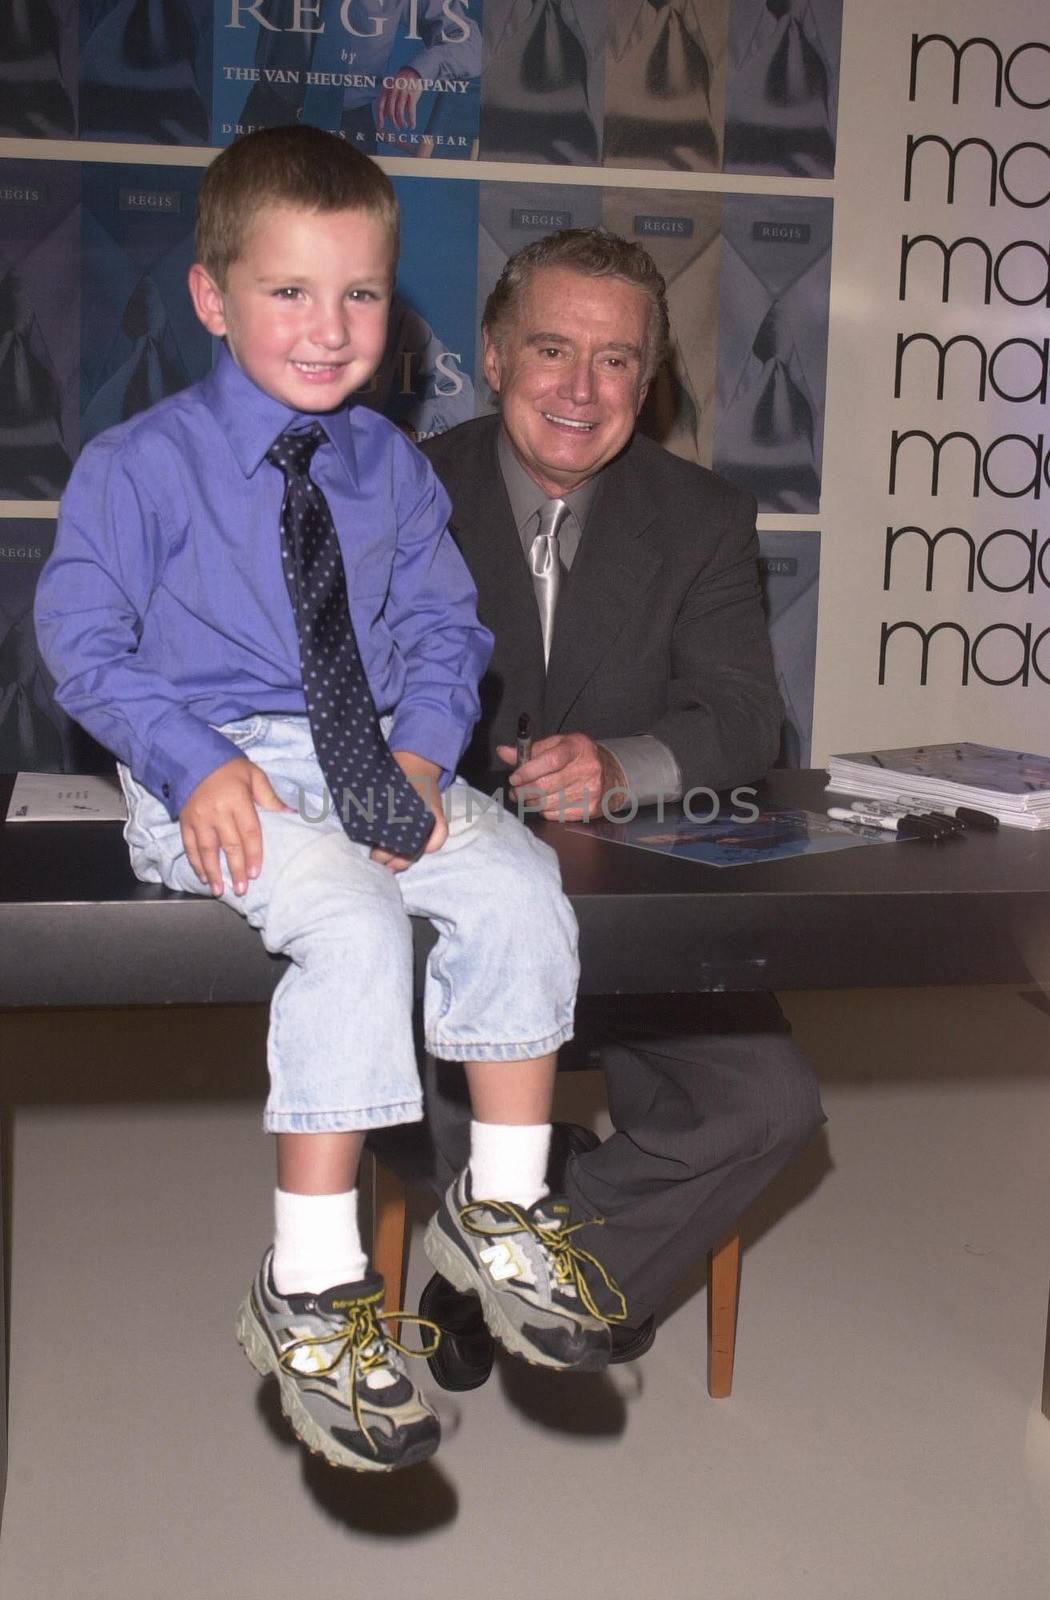 Regis Philbin and Young Fan at Robinson's-May in Beverly Hills to promote new clothes line. 08-23-00